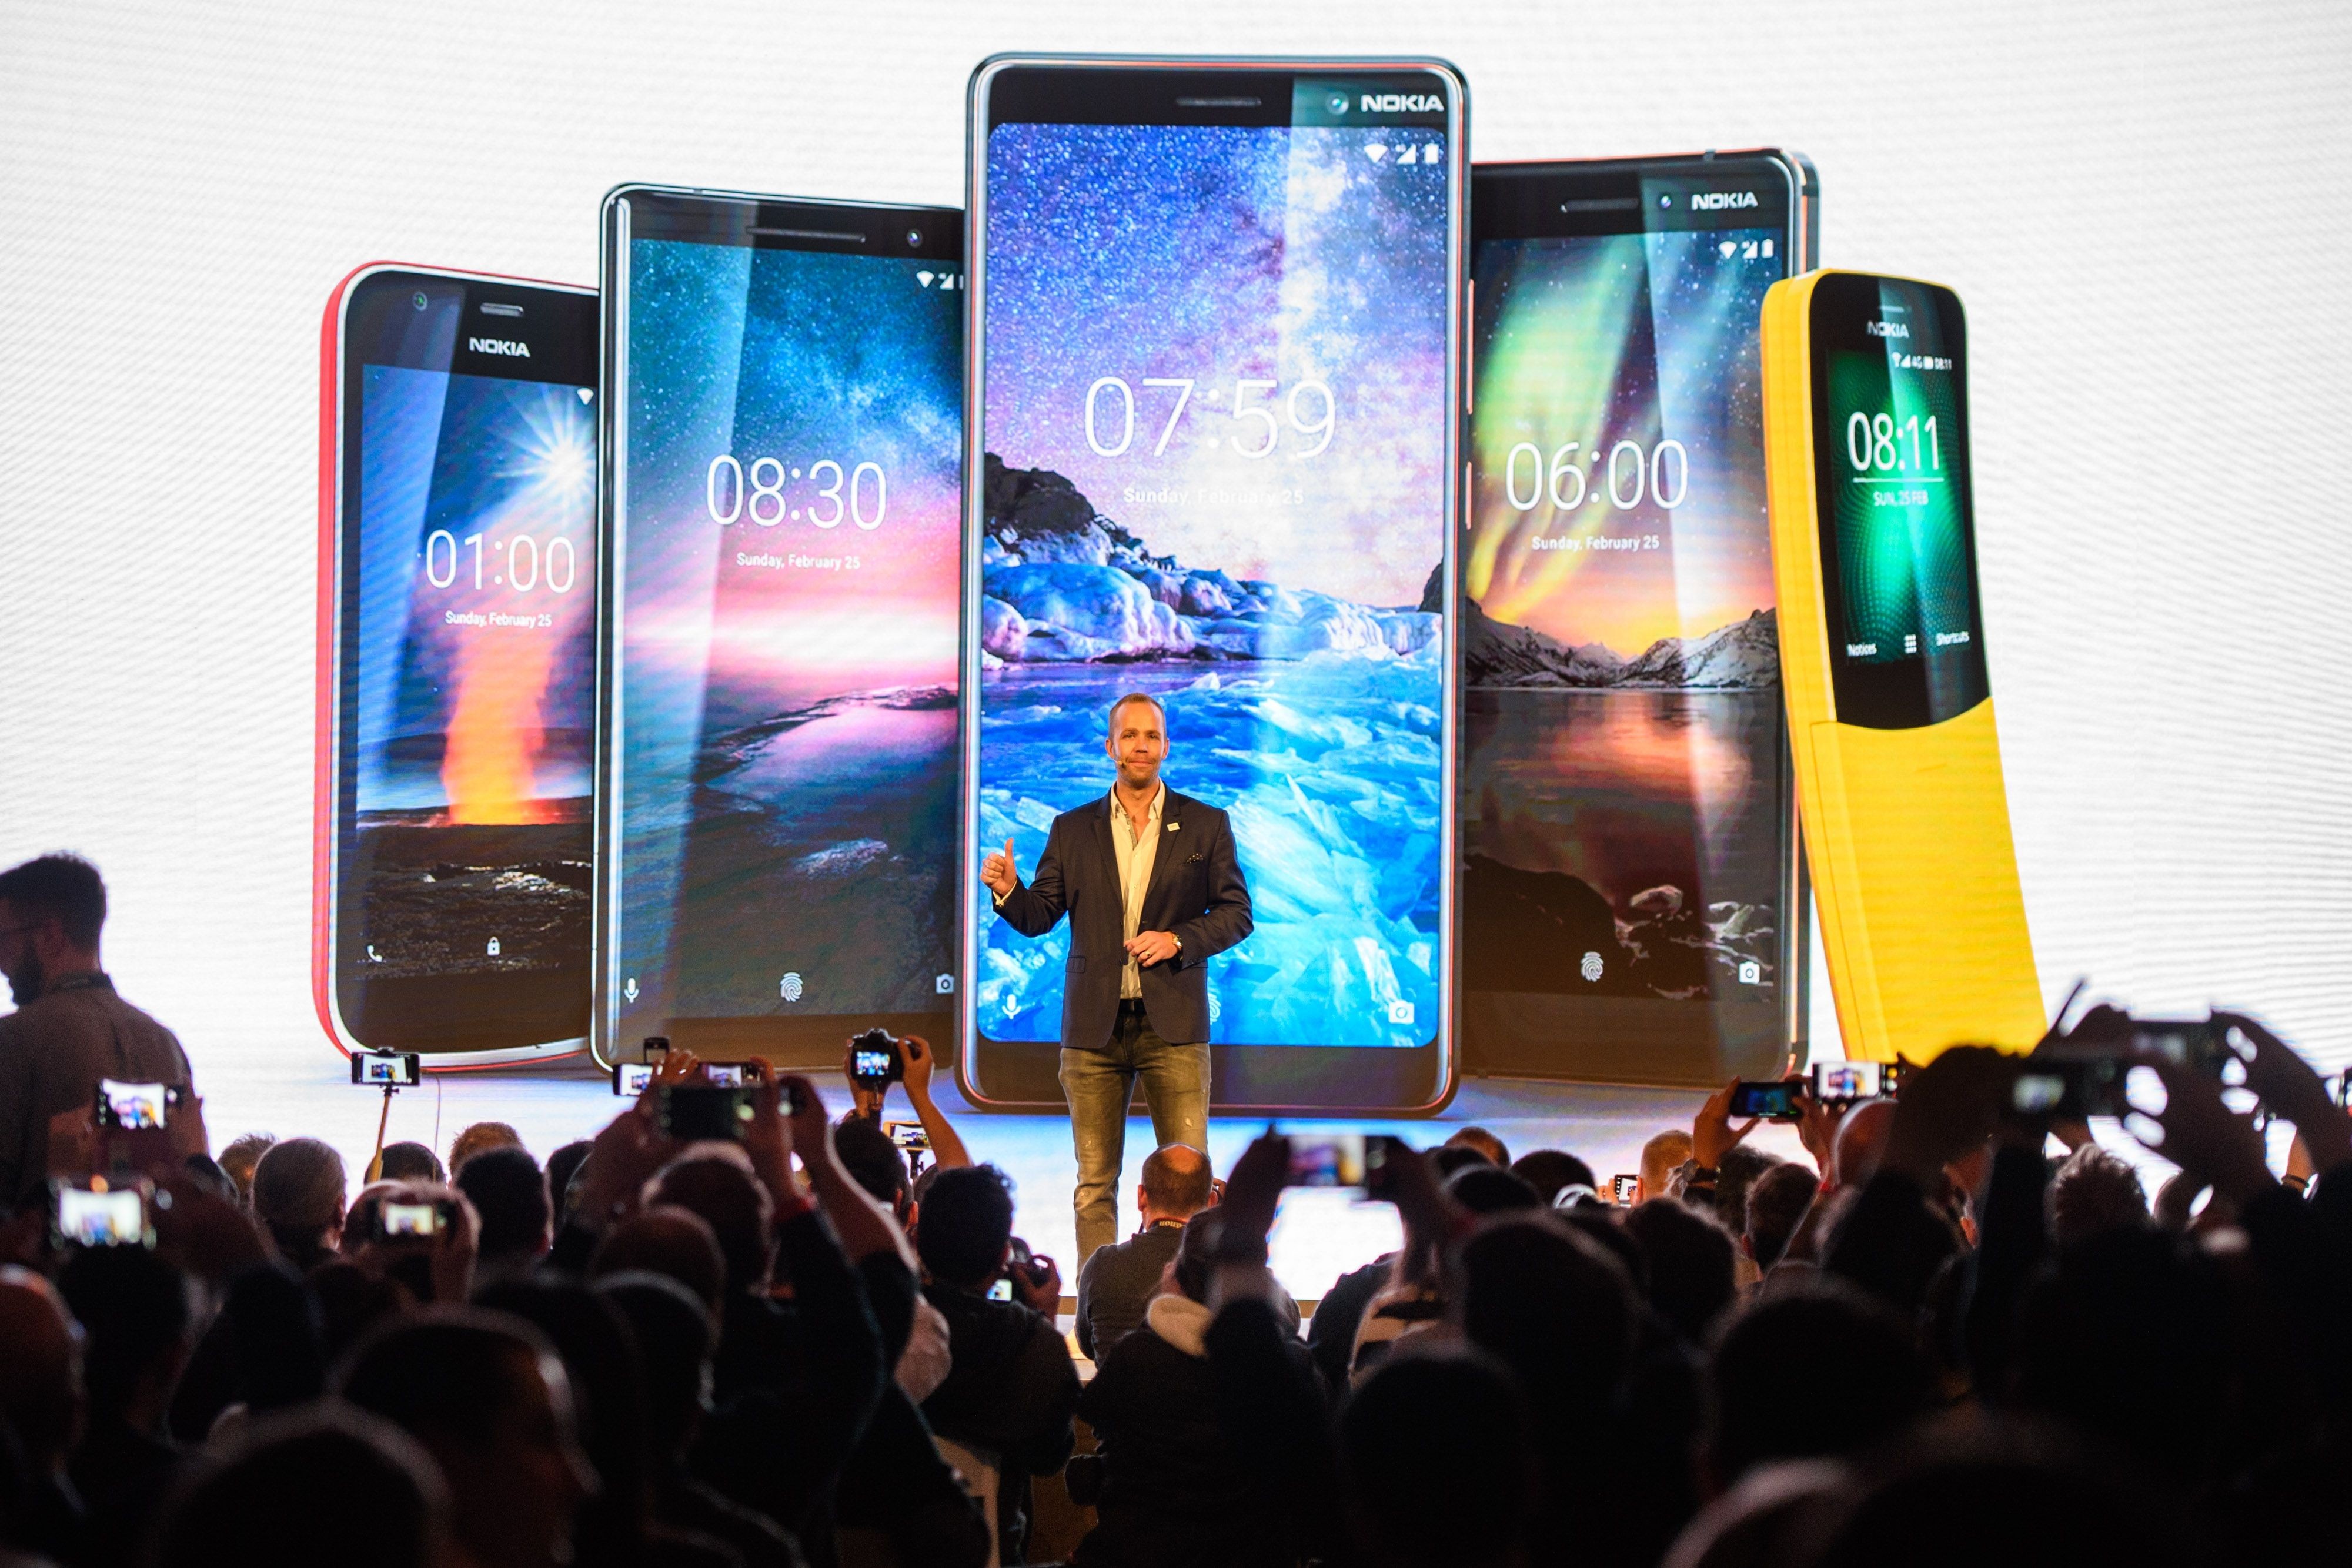 Nokia launched an impressive range of new phones at the Mobile World Congress 2018 in Barcelona, last week.